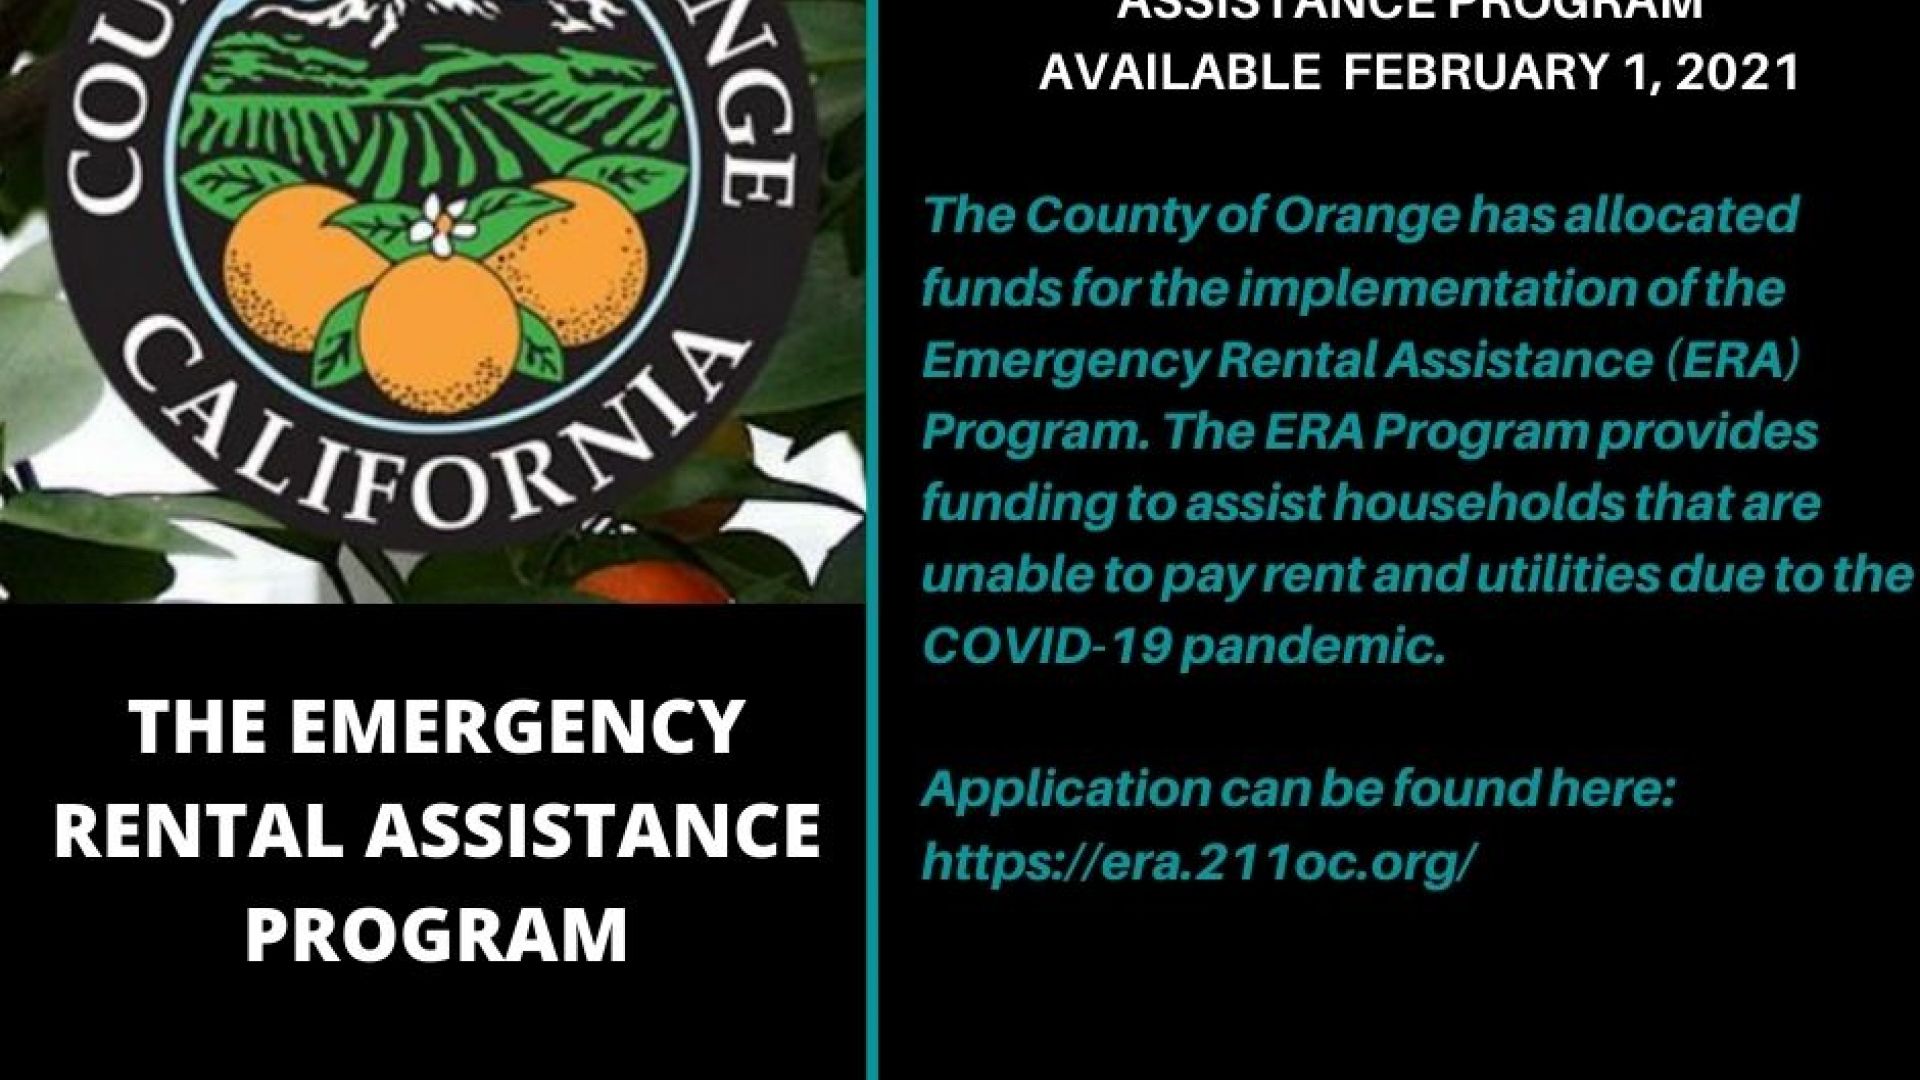 THE EMERGENCY RENTAL  ASSISTANCE PROGRAM   AVAILABLE  FEBRUARY 1, 2021